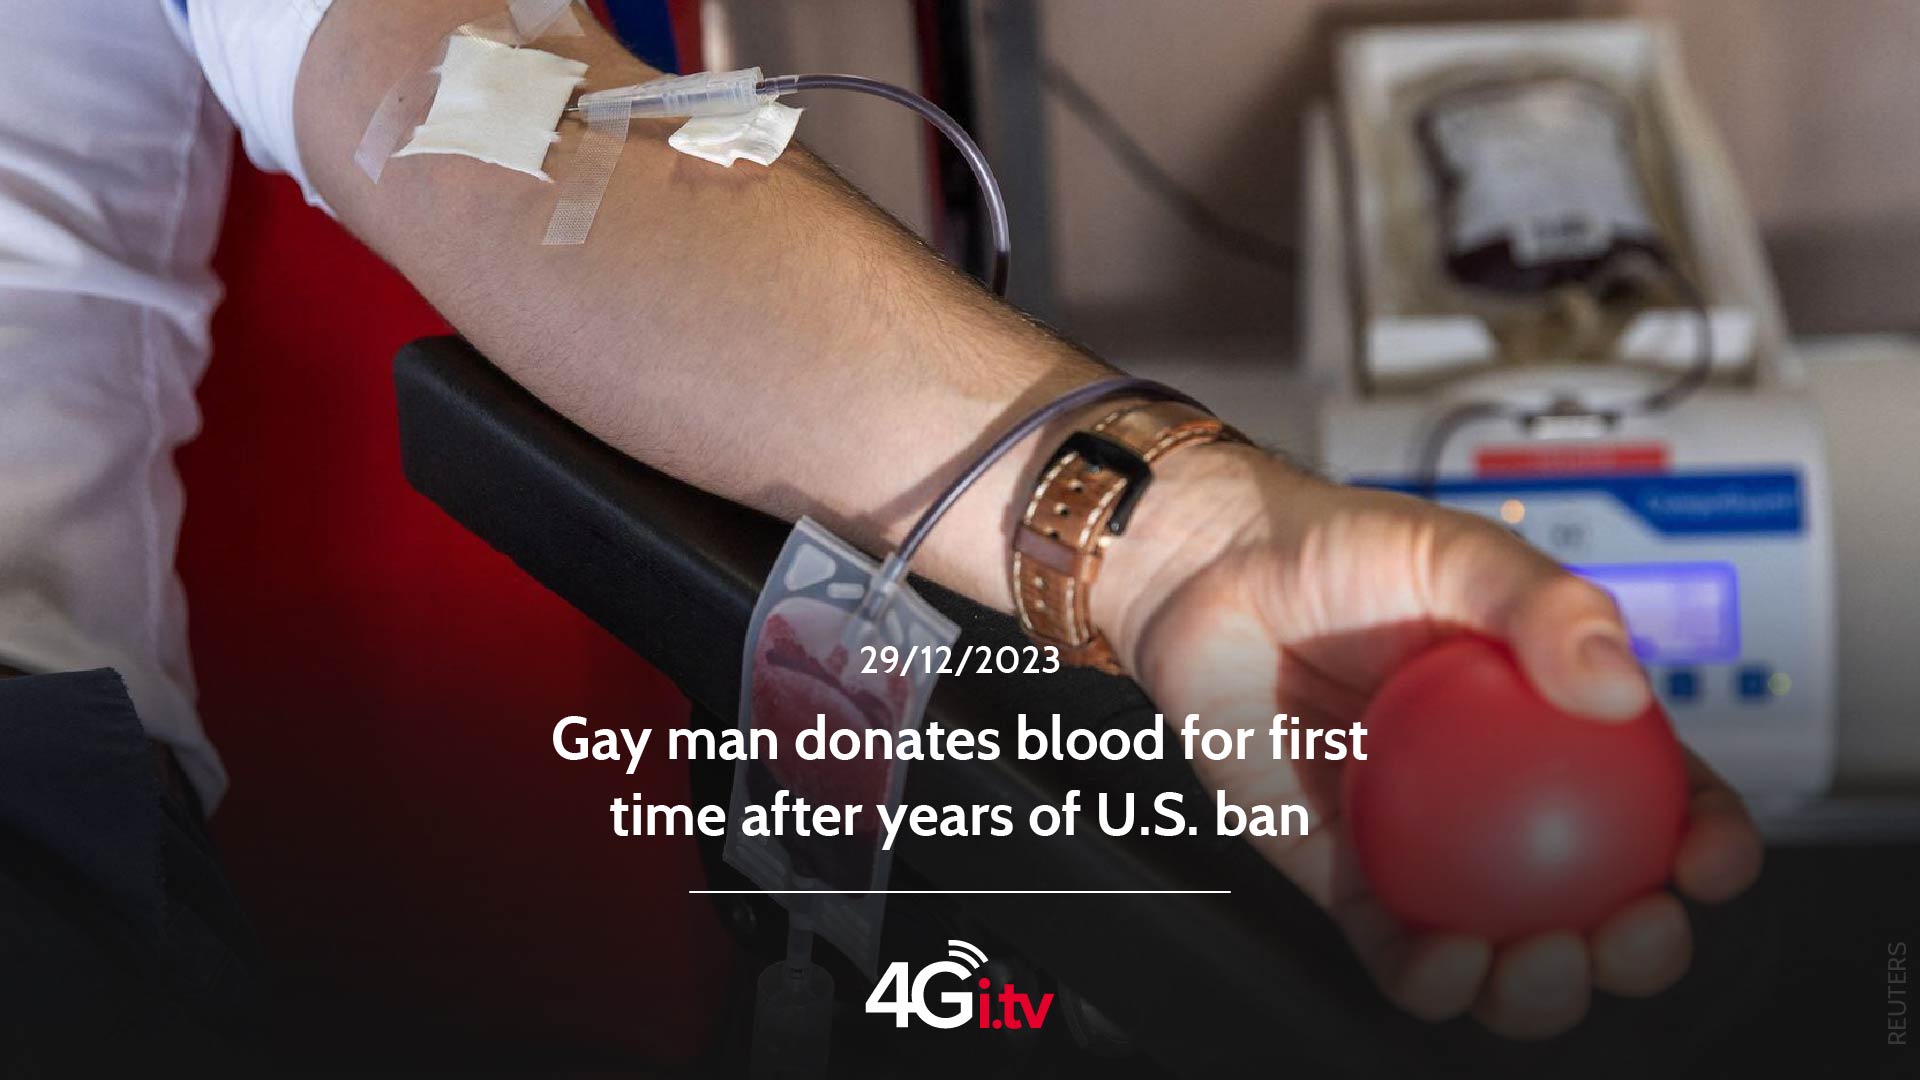 Подробнее о статье Gay man donates blood for first time after years of U.S. ban